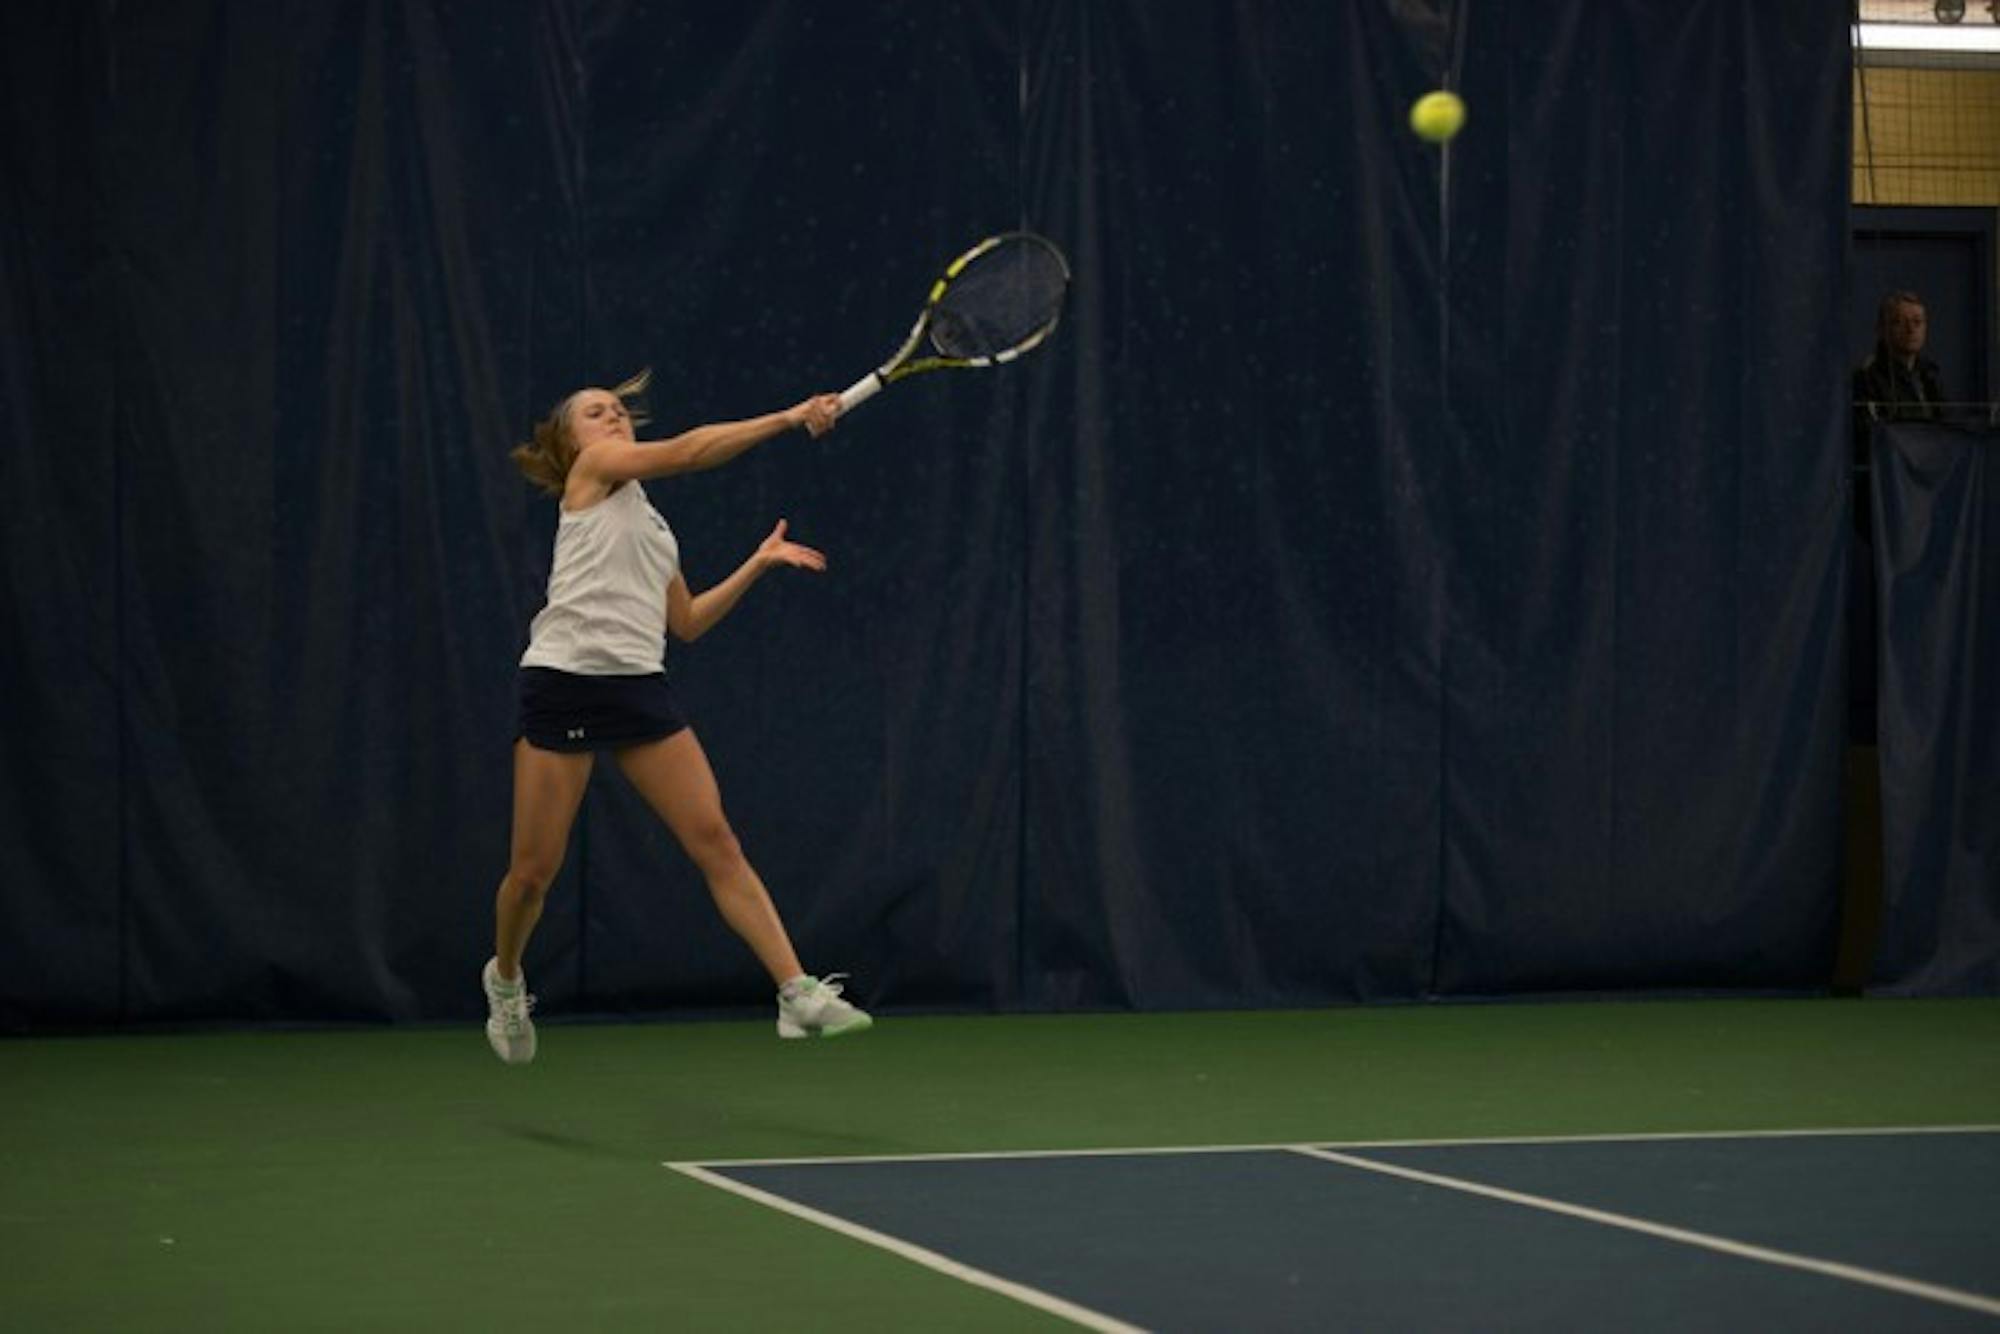 Irish sophomore Monica Robinson hits a forehand during Notre Dame’s 6-1 loss to Stanford on Feb. 6 at Eck Tennis Pavilion.